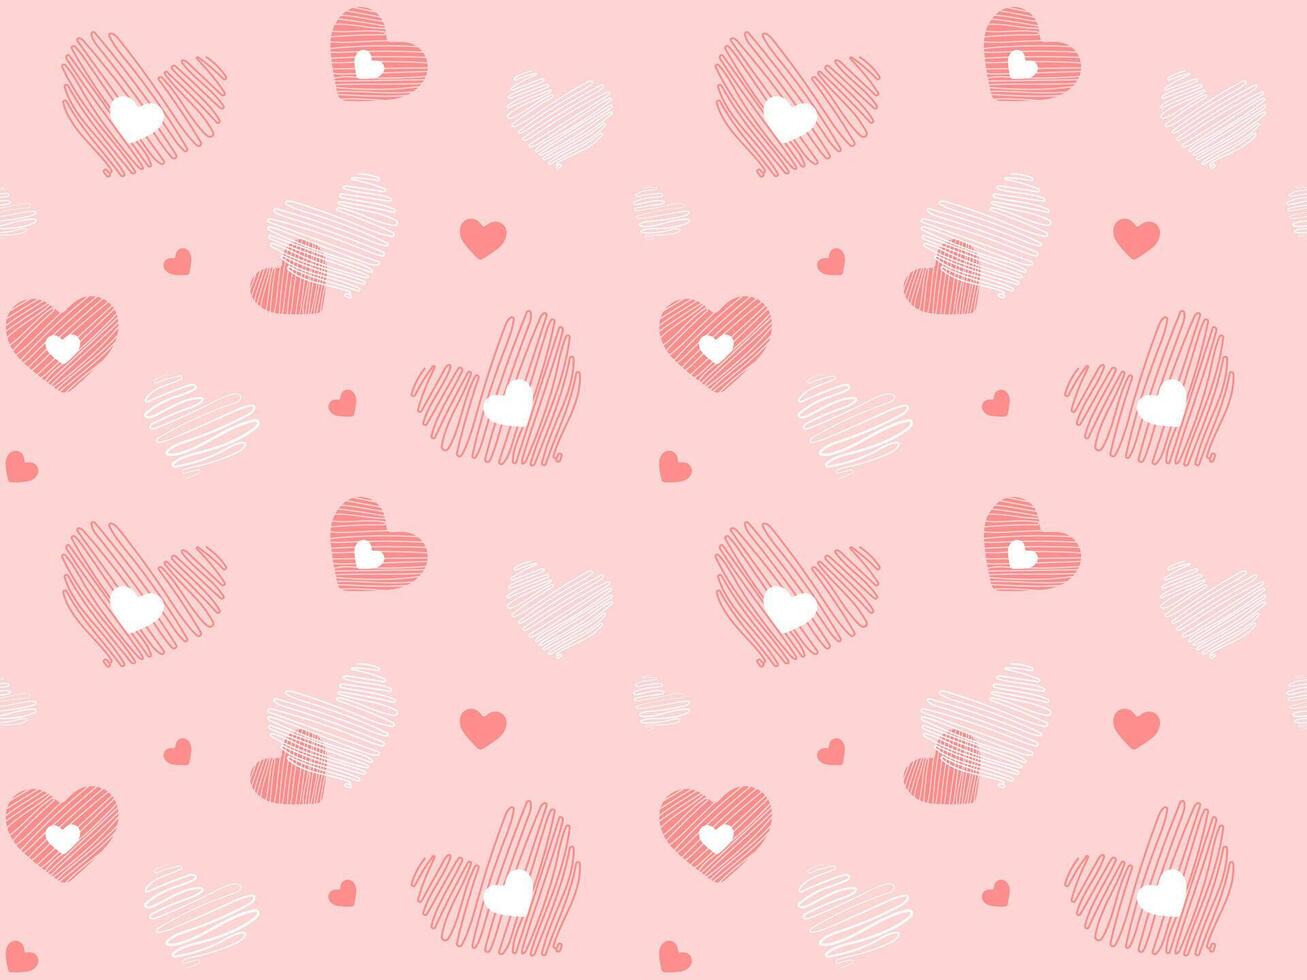 Seamles pattern with cute red and white doodle hearts on pink background vector